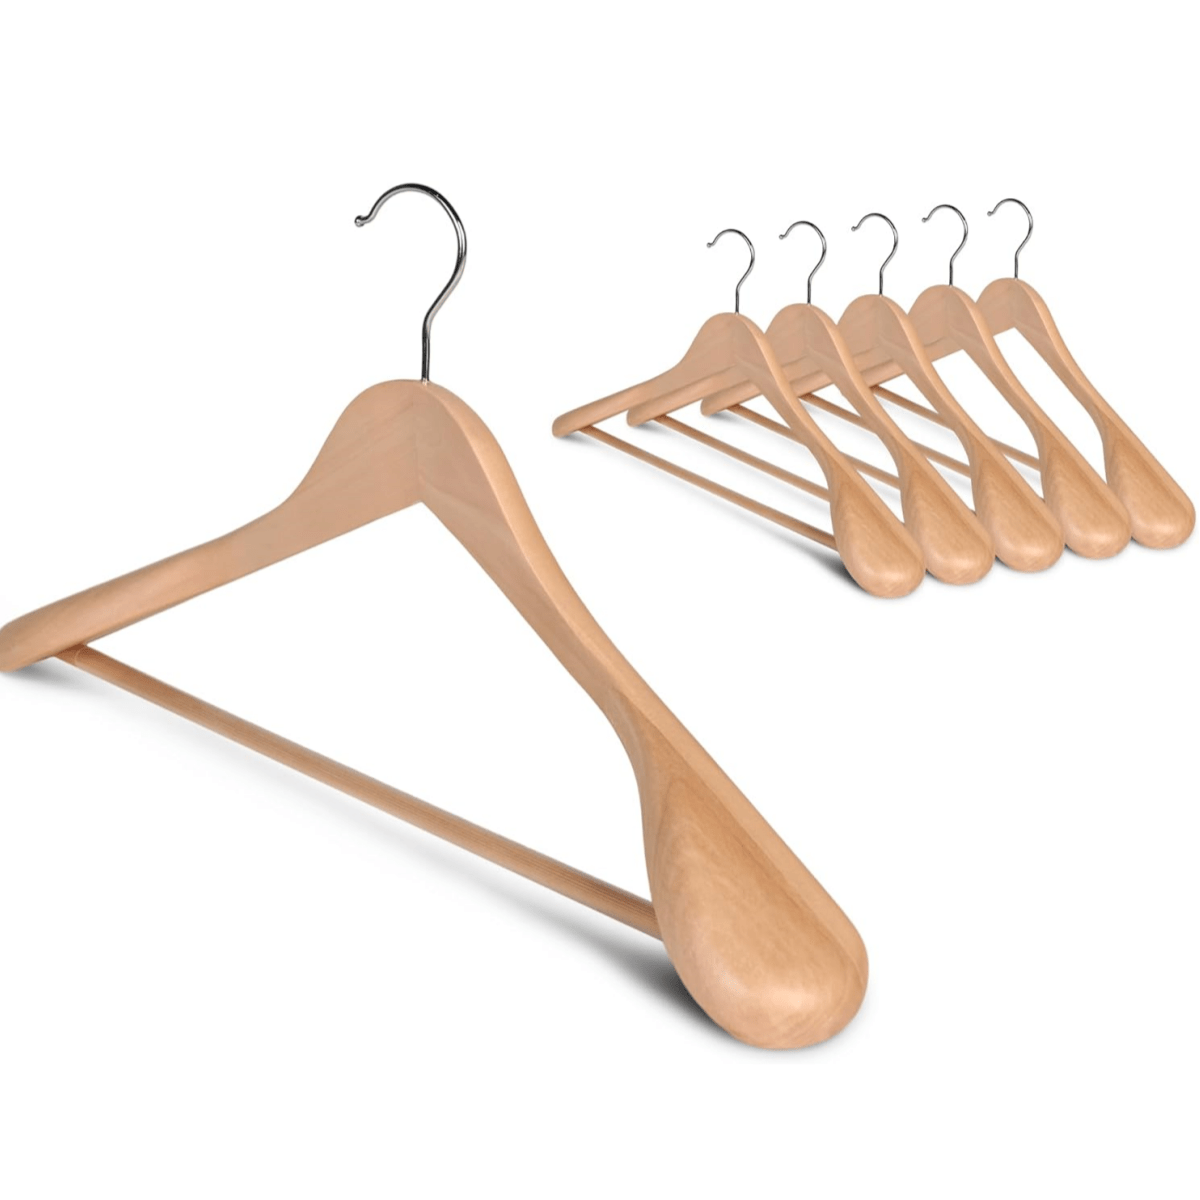 

6pcs Wide Shoulder Wooden Hangers Coat Hangers With Non Slip Pants Bar, Heavy Duty Suit Hangers Wood Clothes Hangers With Smooth Finish 360° Swivel Hook For Sweater Jackets Shirts For Shops Use